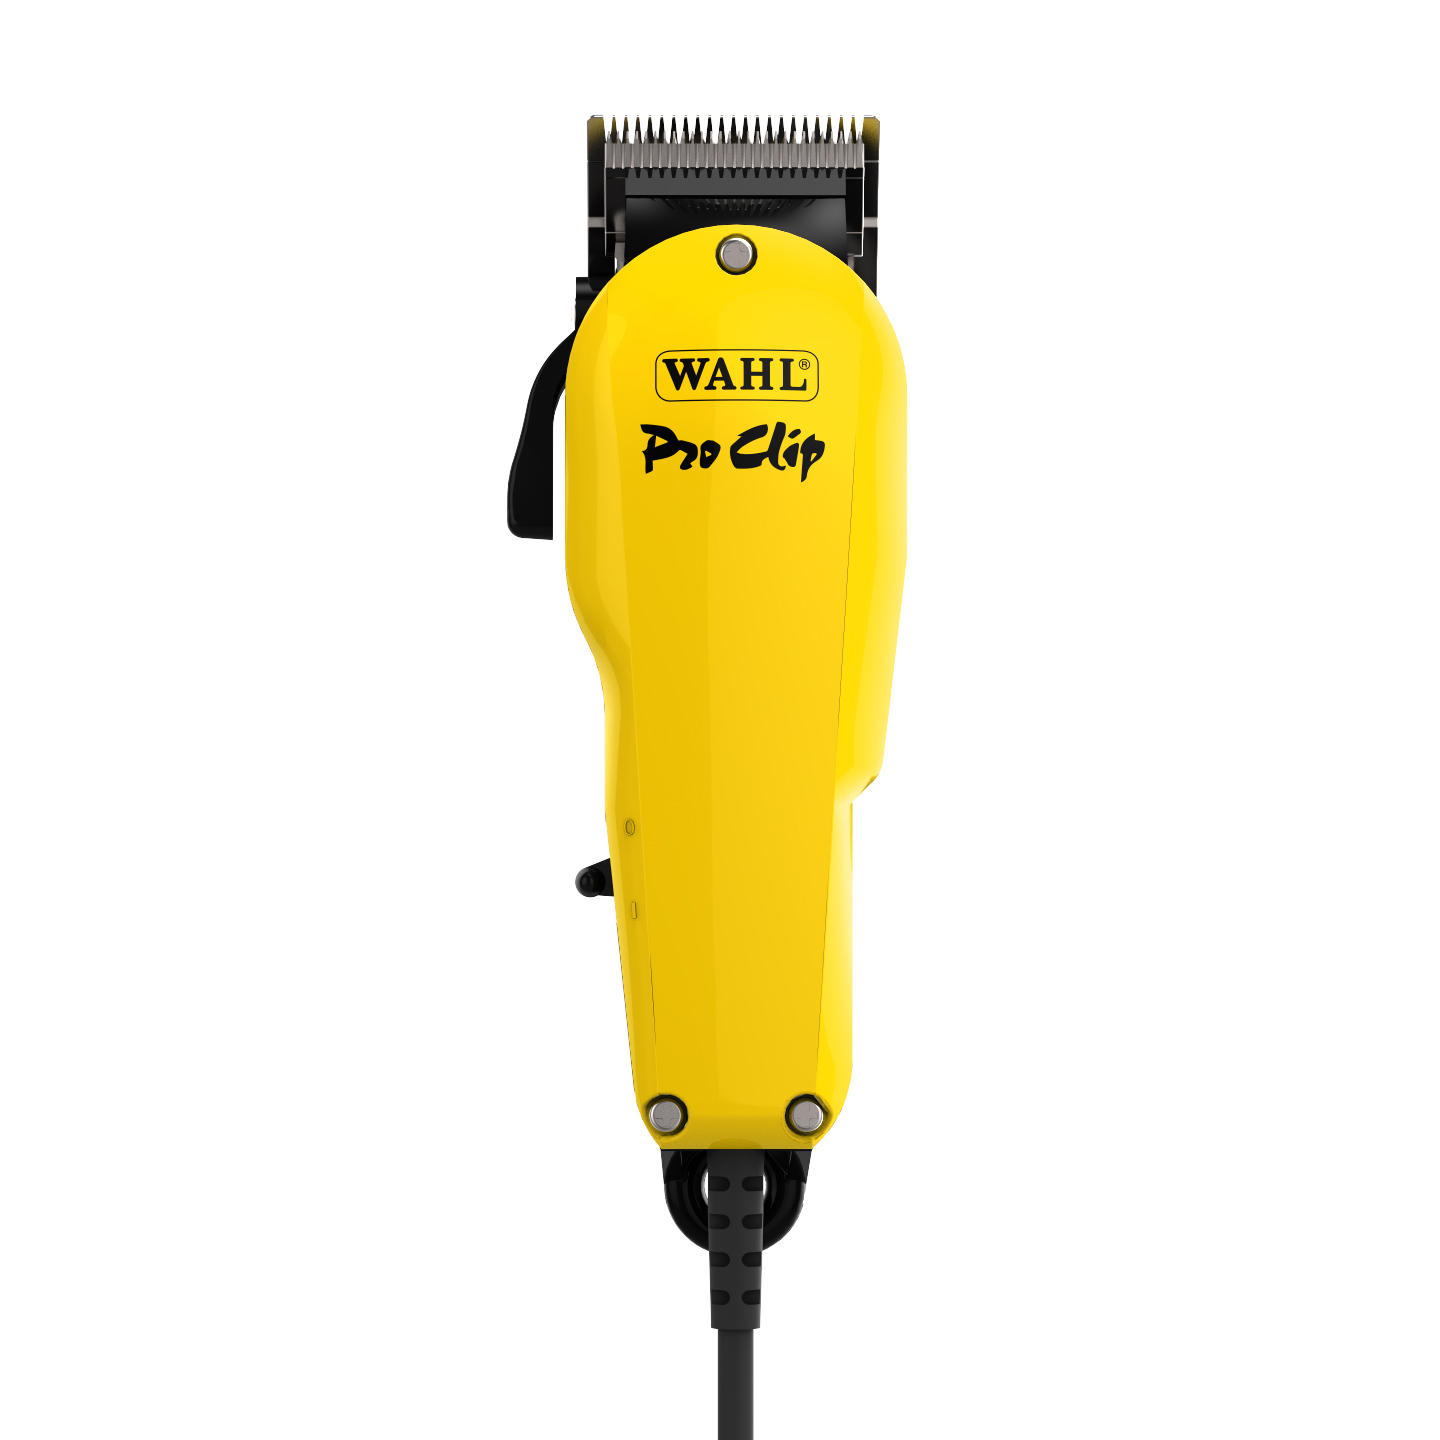 best value hair clippers